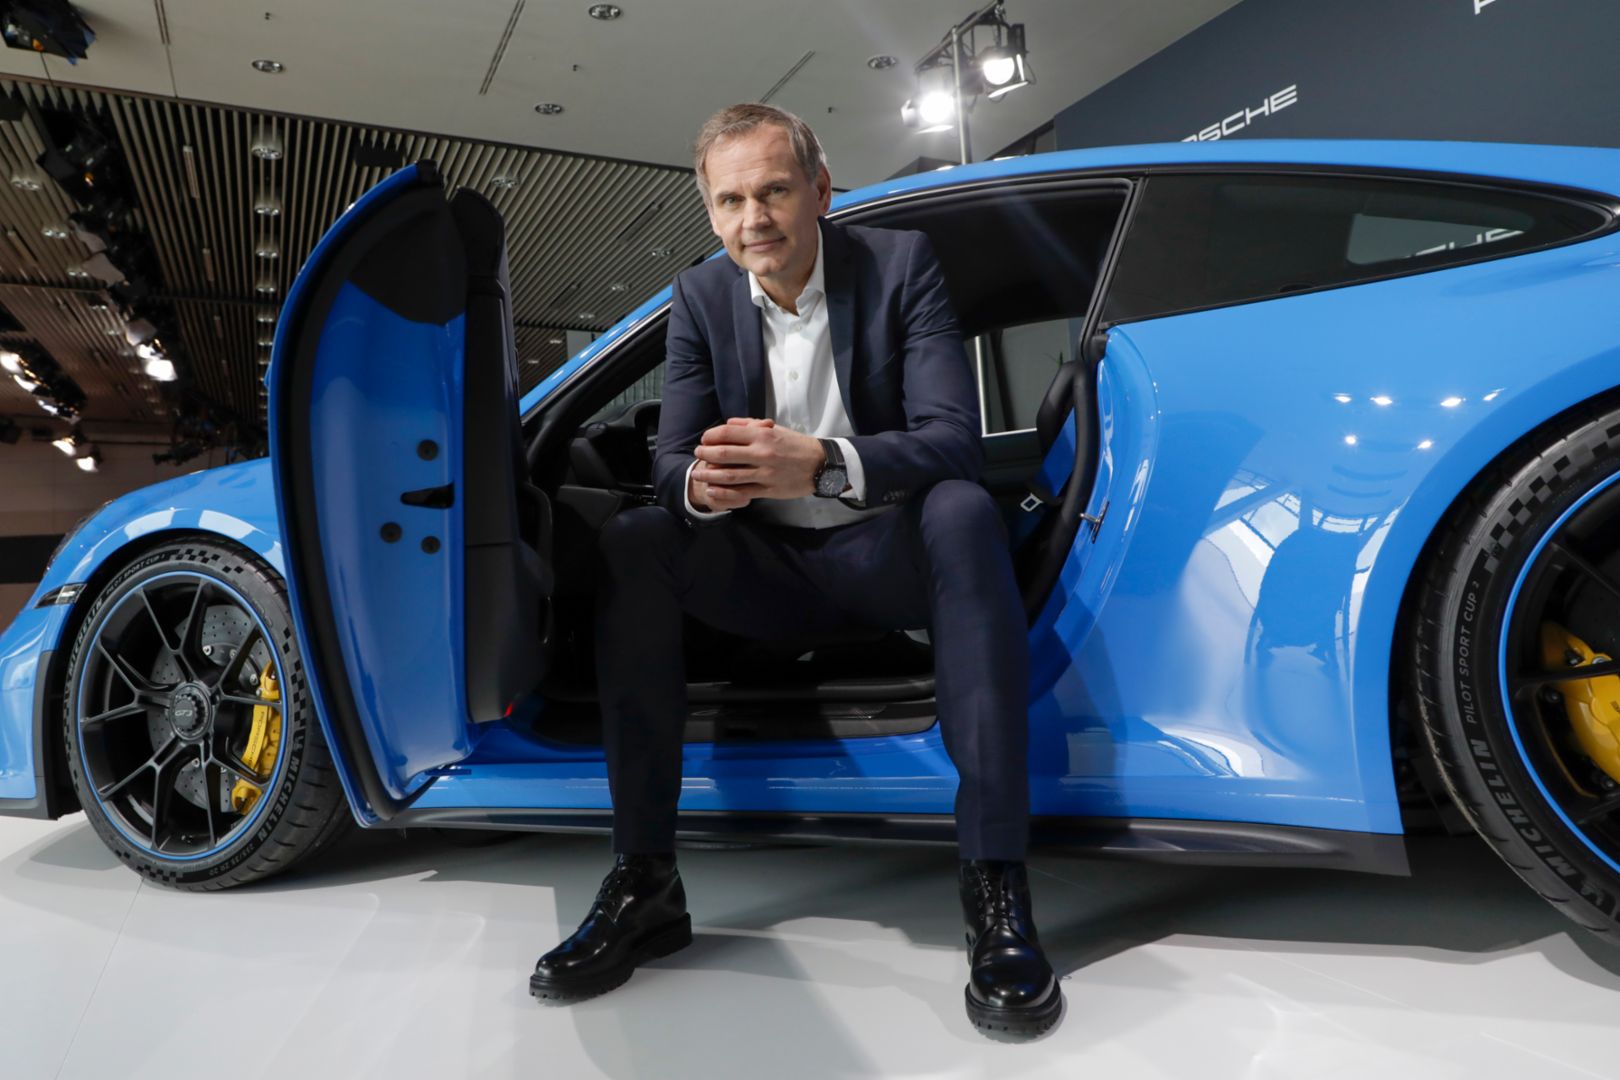 Porsche CEO Oliver Blume takes over as head of Volkswagen Group - Inspiration 2 Day